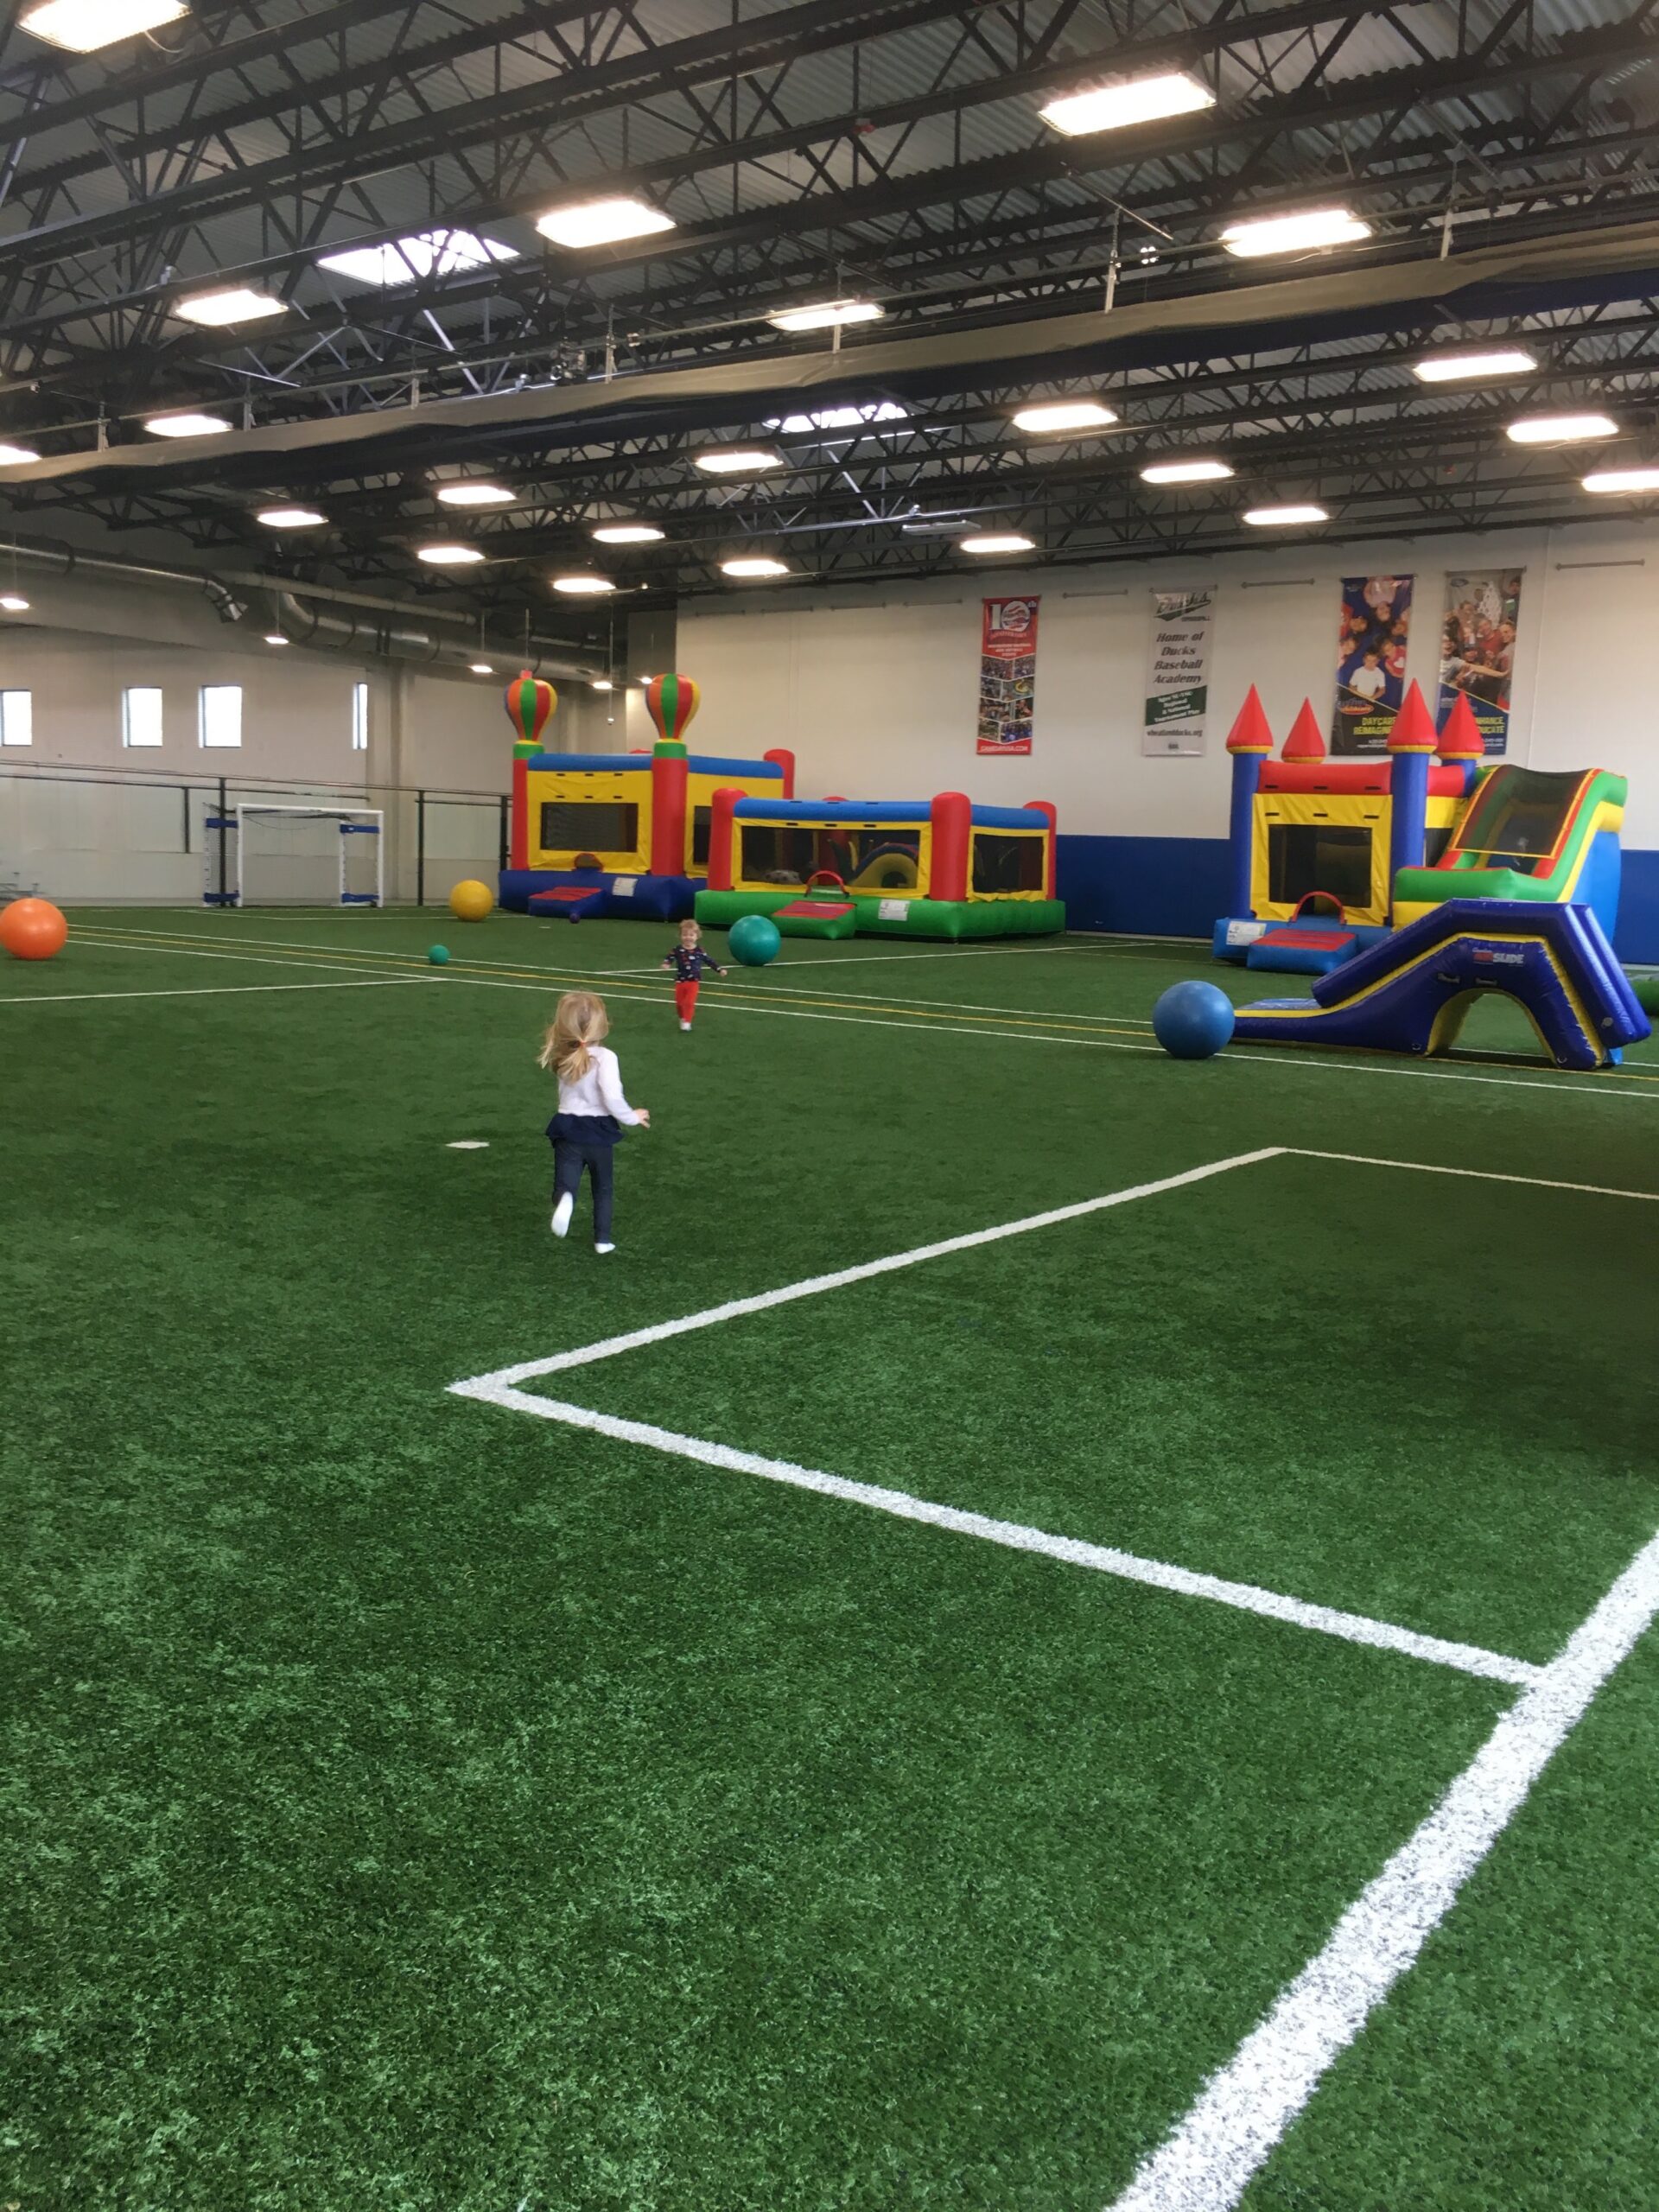 Turf field with inflatables.